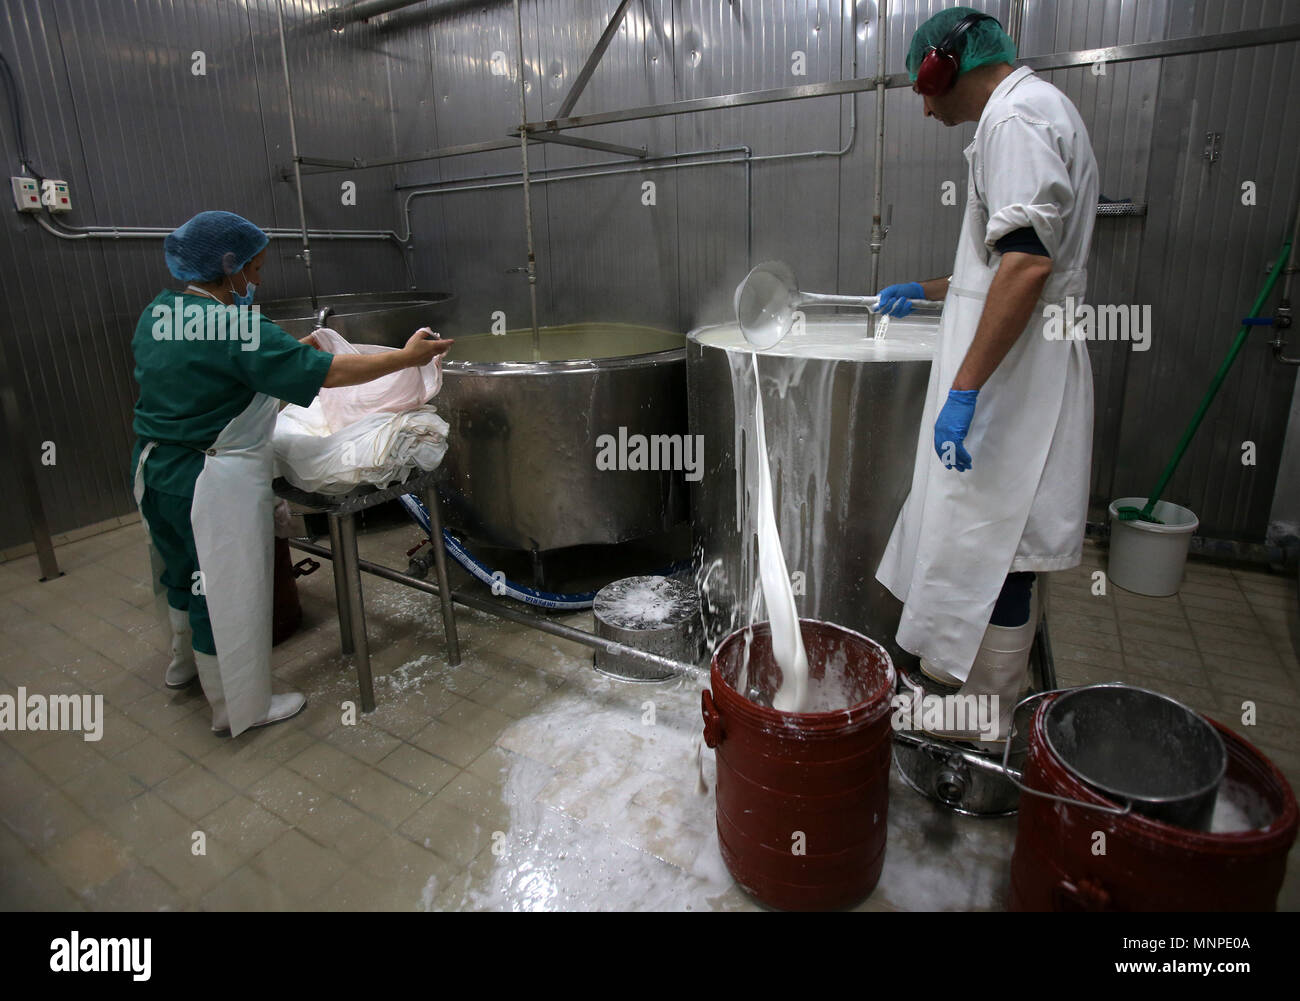 (180519) -- CORINTH, May 19, 2018 (Xinhua) -- People work at a cheese factory in Kalliani village of Corinth, some about 70 Km west of Athens, Greece, on May 16, 2018. In the highlands of Corinth prefecture at the Peloponnese peninsula, just two hours from Athens, local agricultural small businesses turn to extroversion to survive the economic crisis. To go with Feature: Greek agricultural community more extrovert in seeking business opportunities. (Xinhua/Marios Lolos) (dtf) Stock Photo